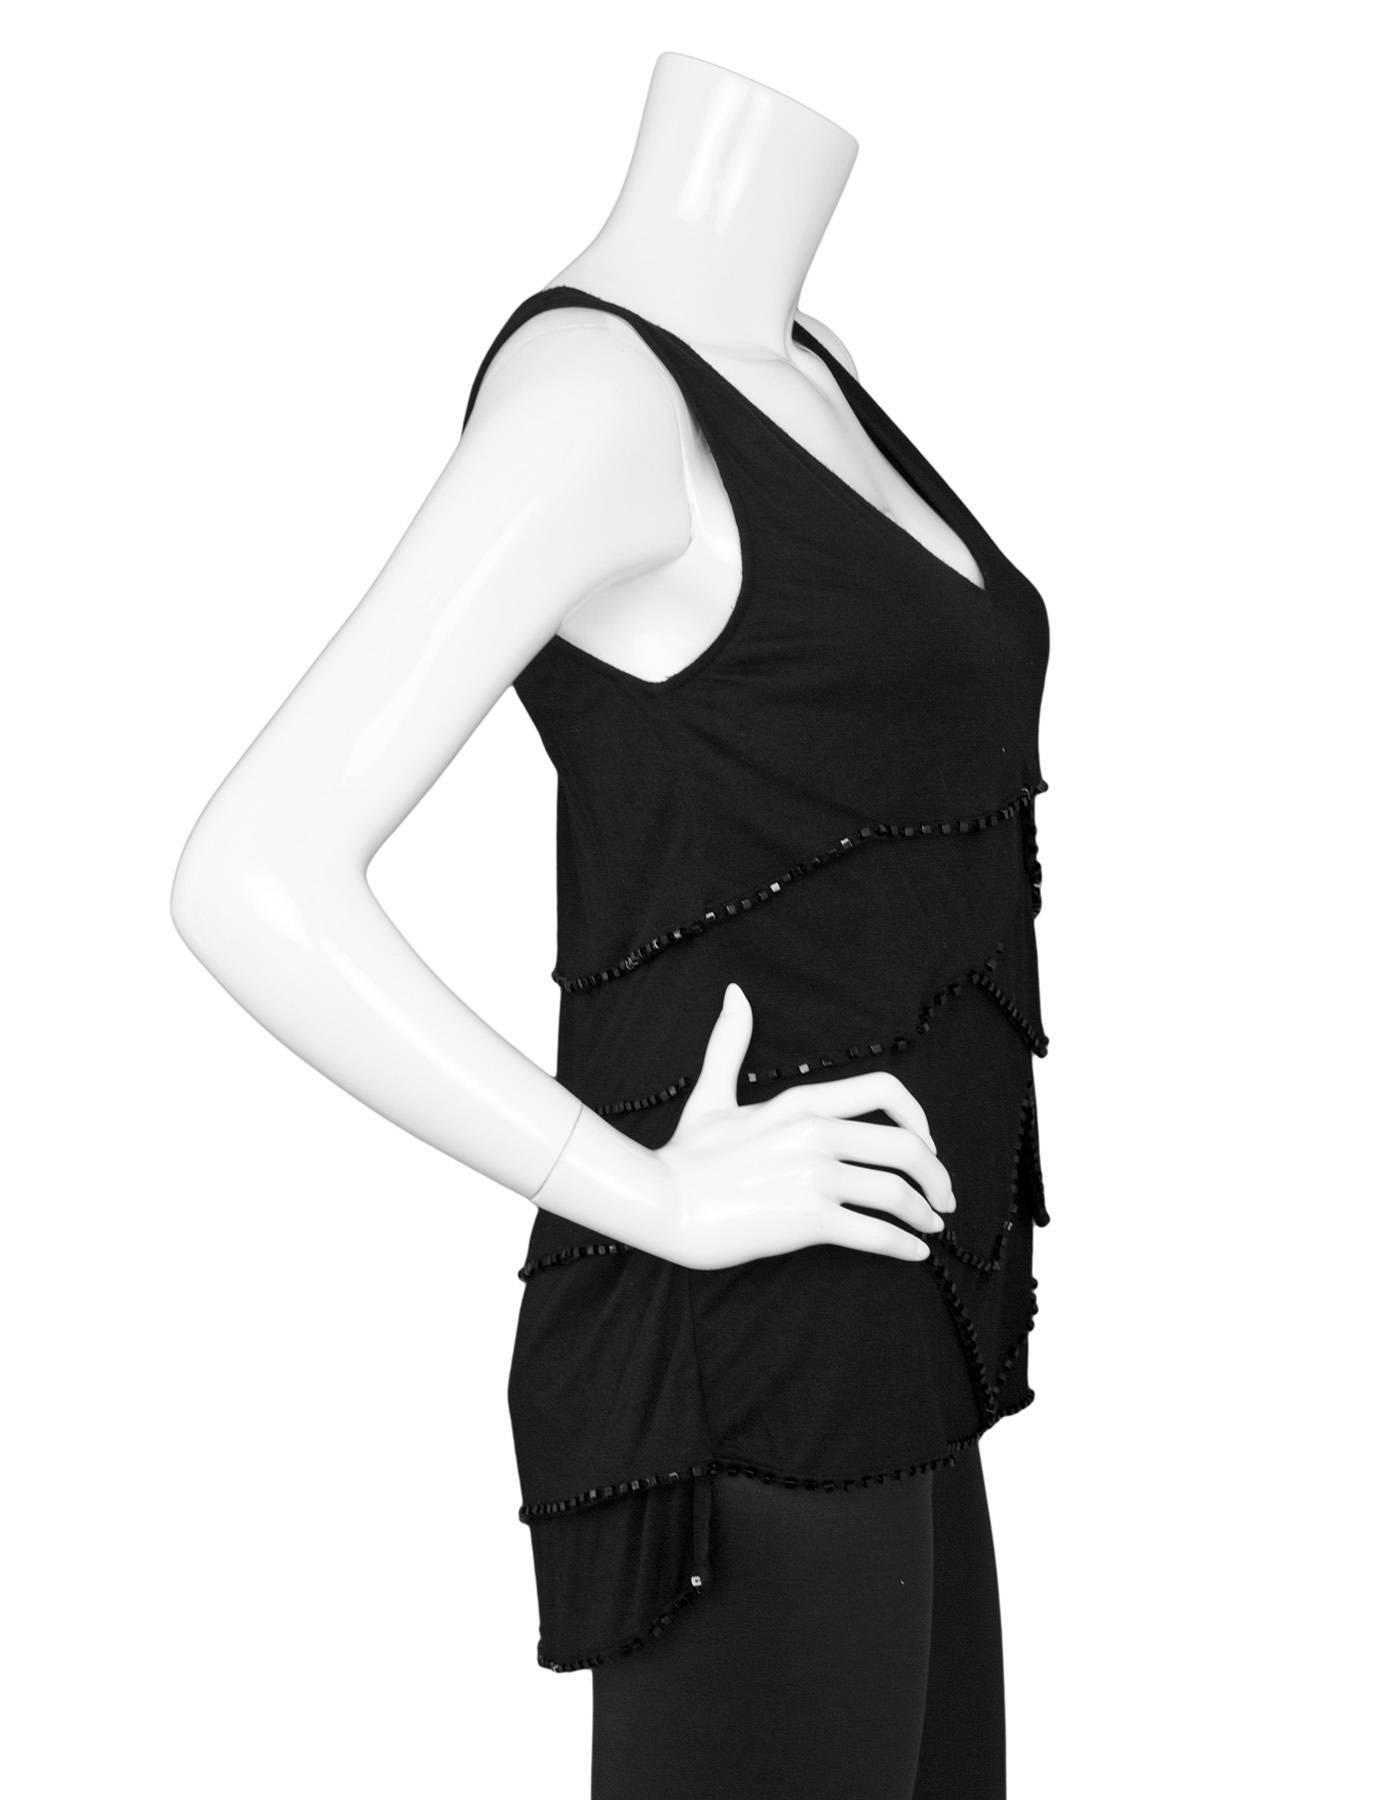 Givenchy Black Sleeveless Beaded Tiered Top 
Features beading throughout each tier 

Color: Black
Composition: Not given- believed to be a cotton-blend
Lining: None
Closure/Opening: Pull over
Exterior Pockets: None
Interior Pockets: None
Overall